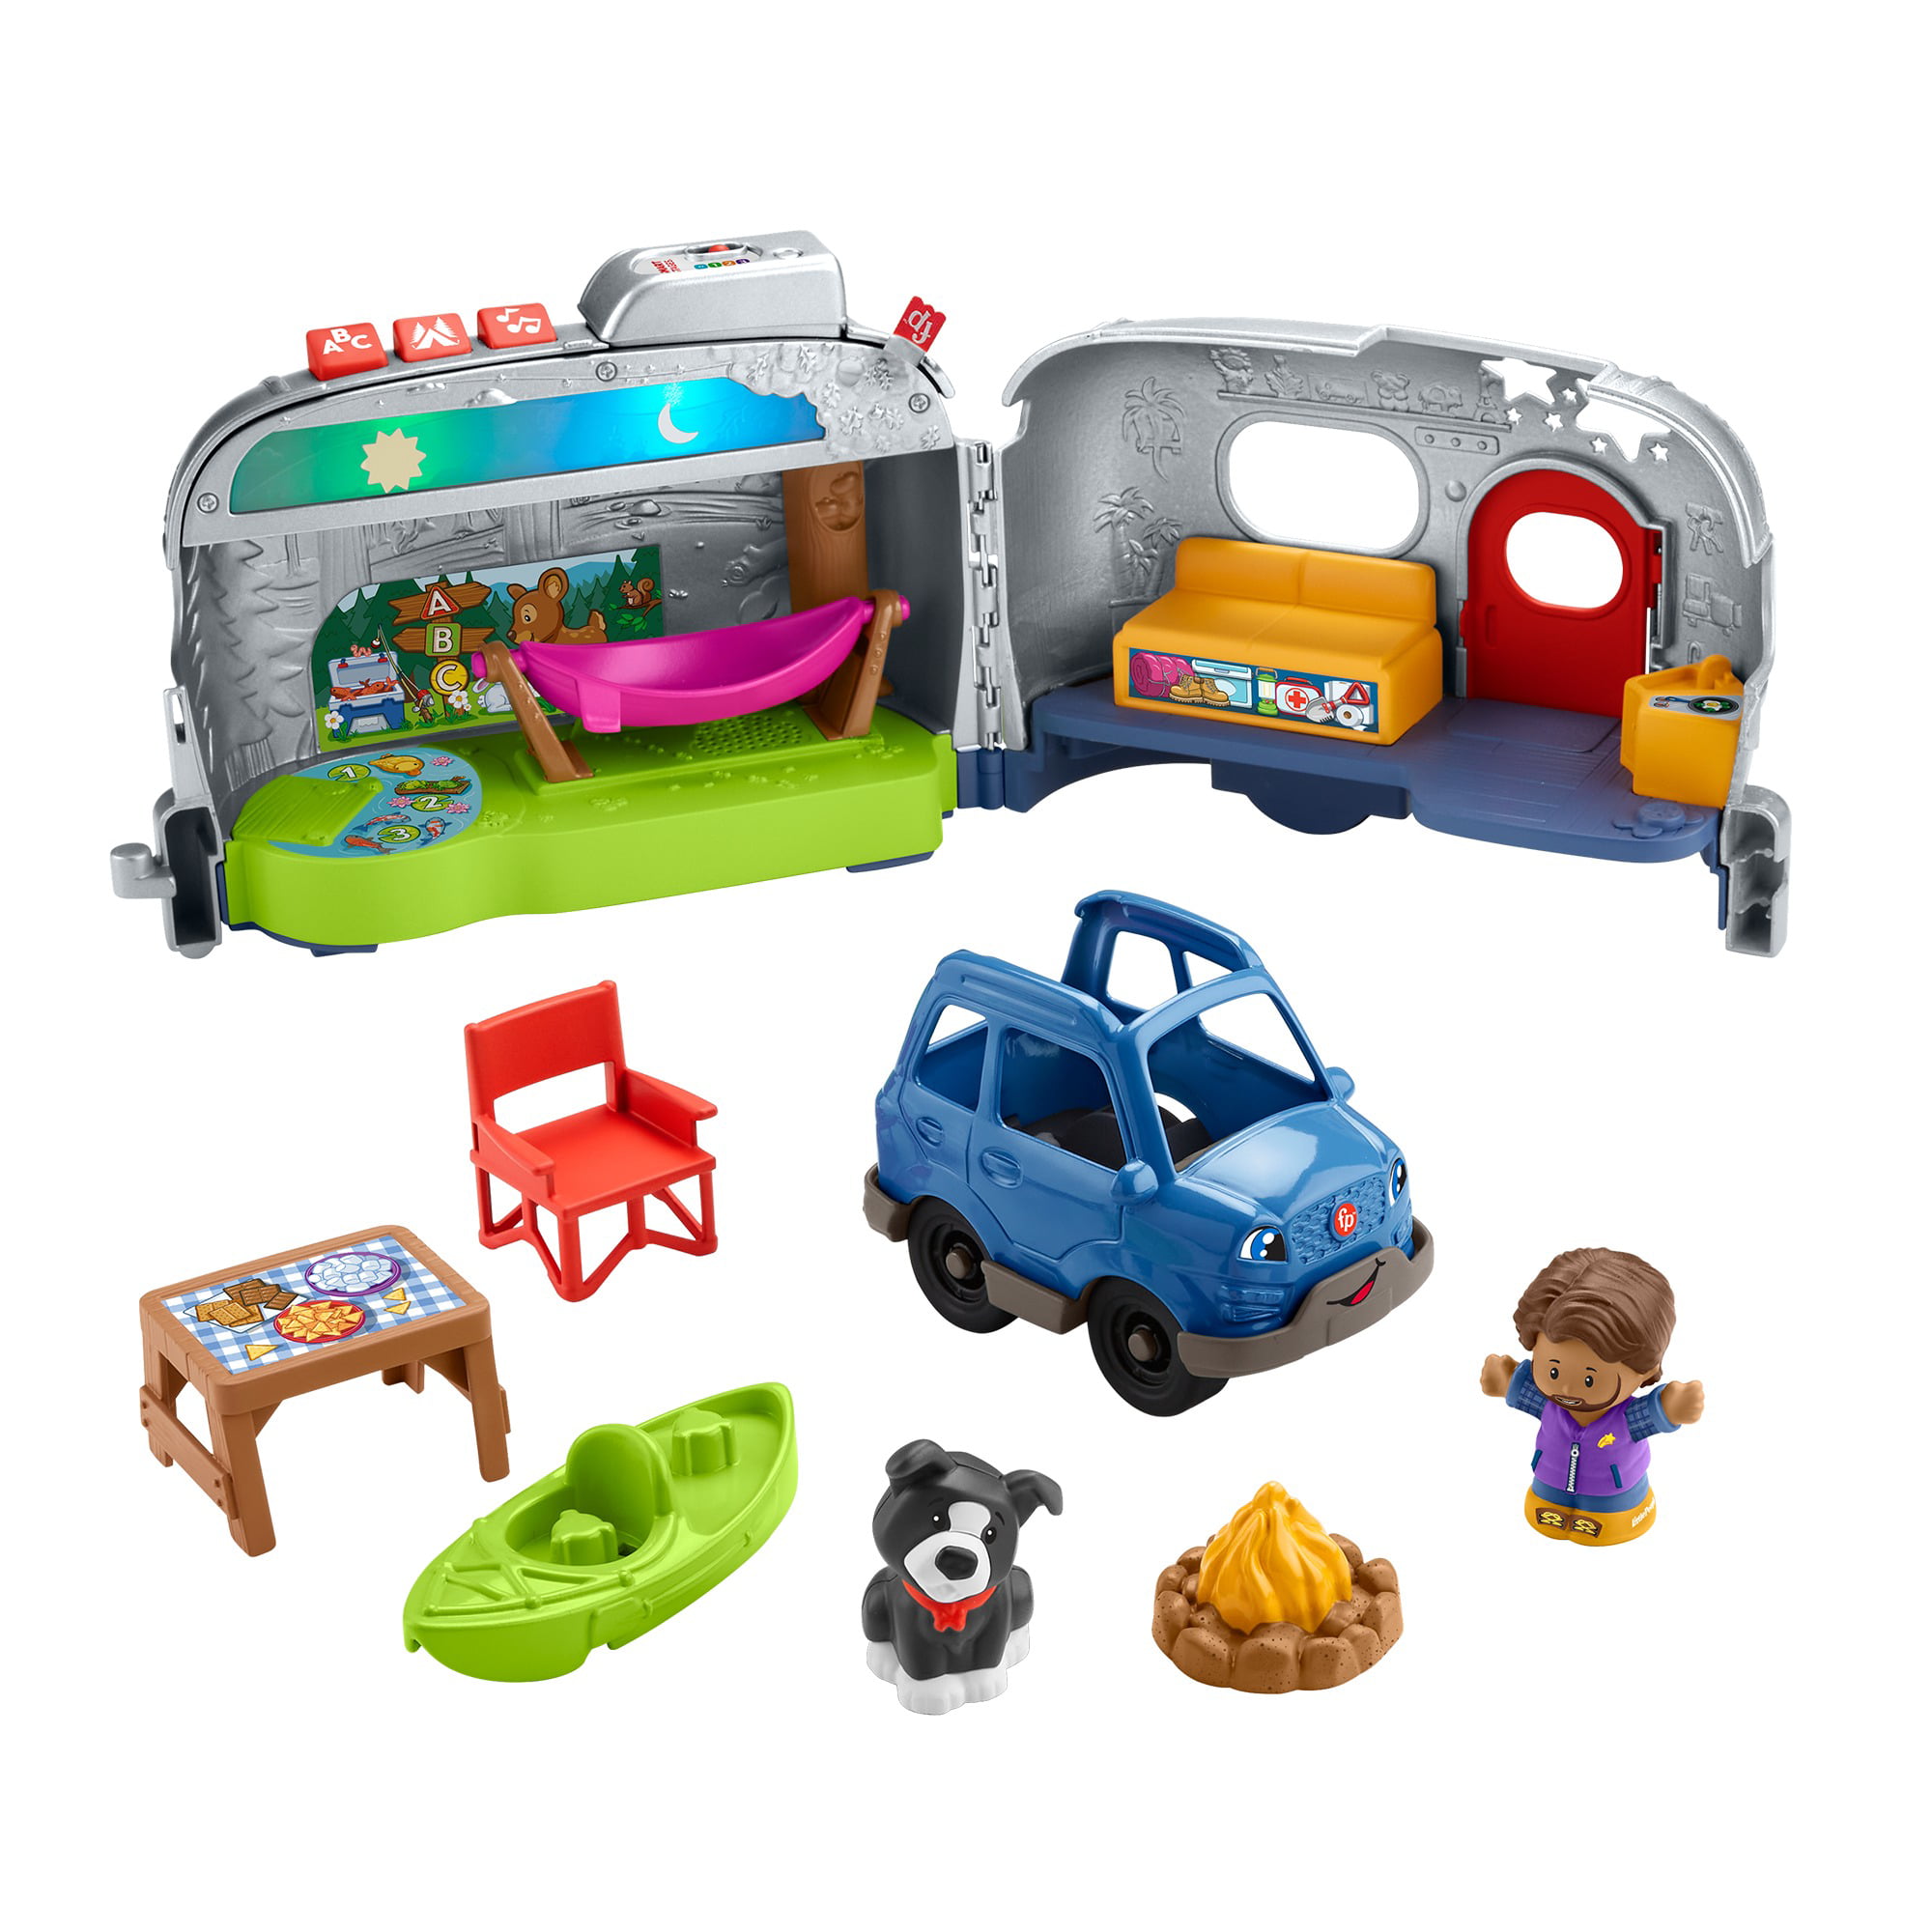 New Fisher Price Little People ORANGE CAR VEHICLE SUV & TRAILER for Camping Fun 